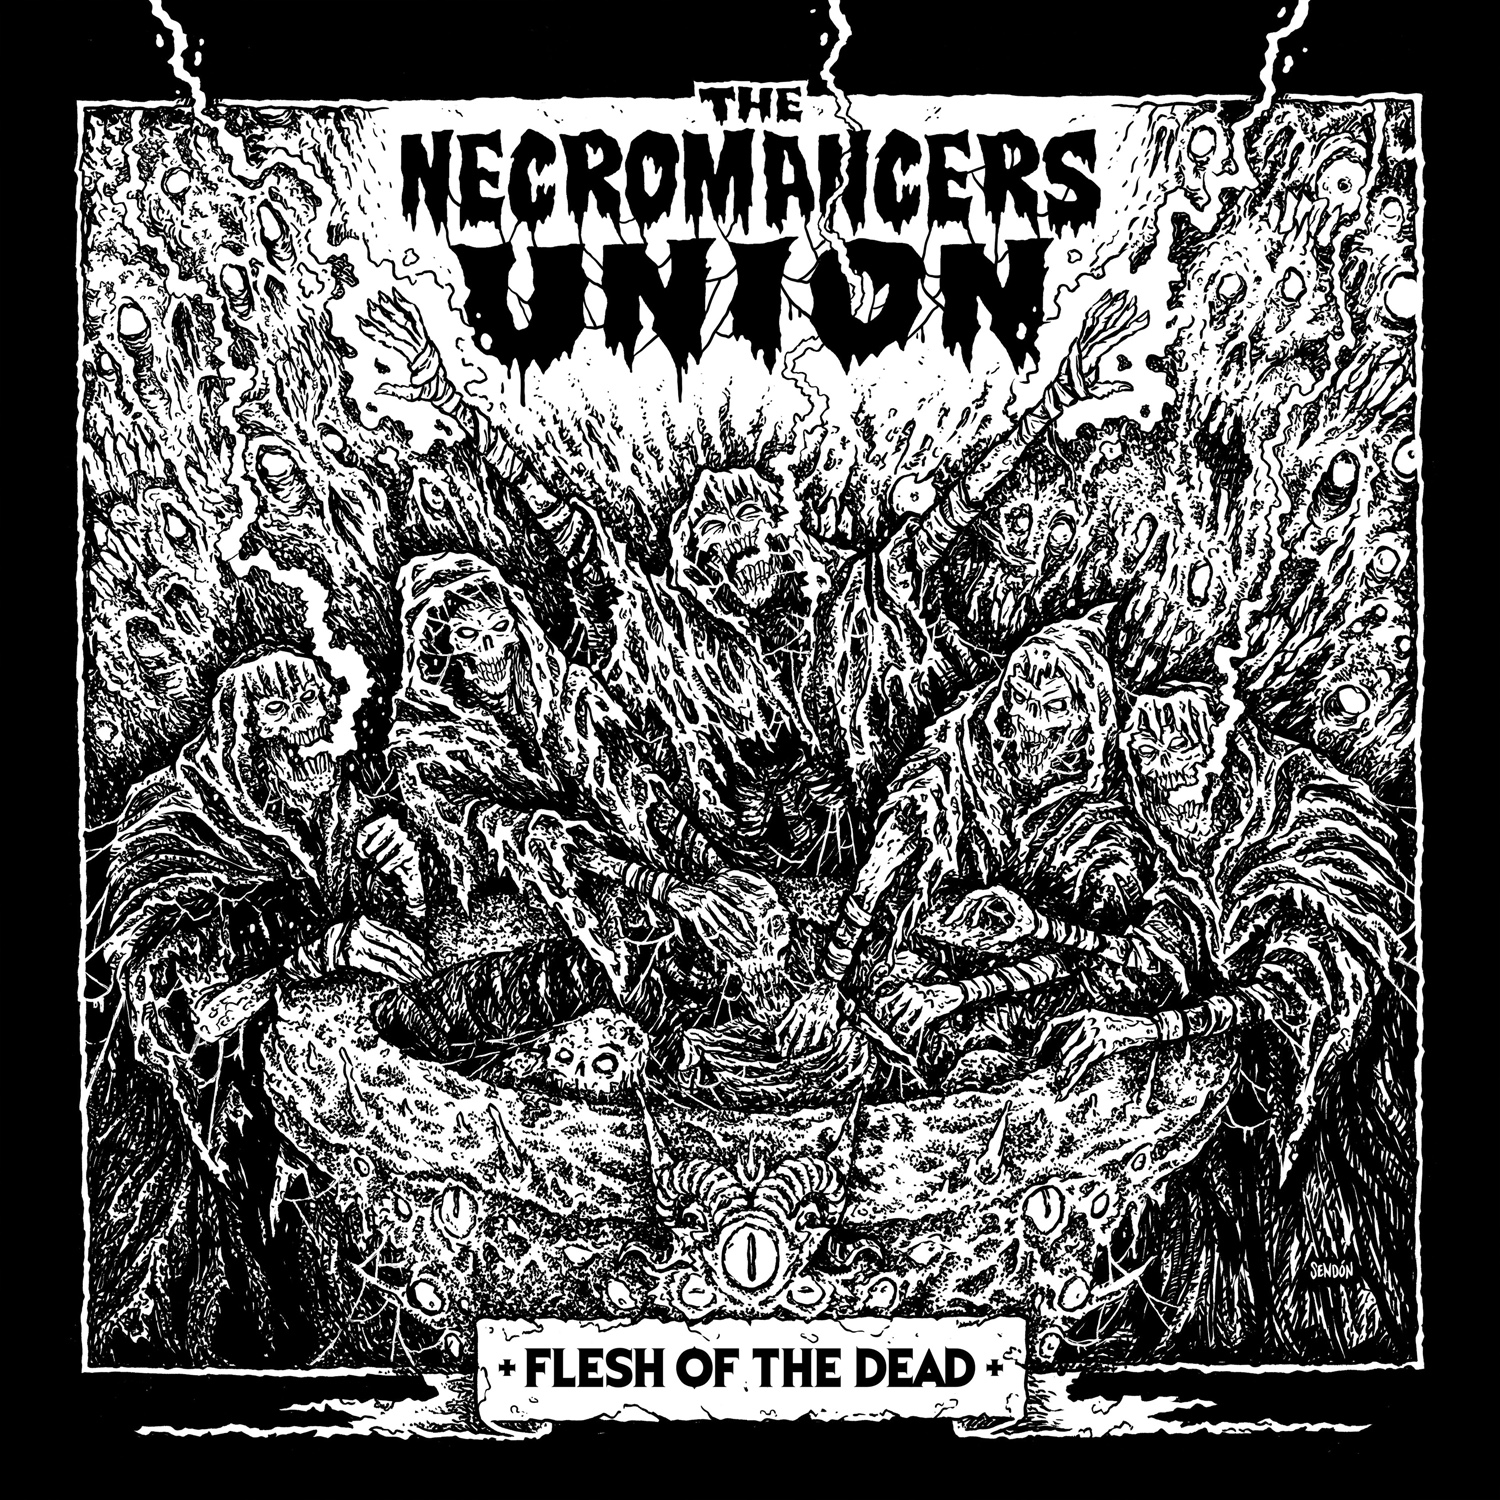 The Necromancers Union – Flesh of the Dead Review